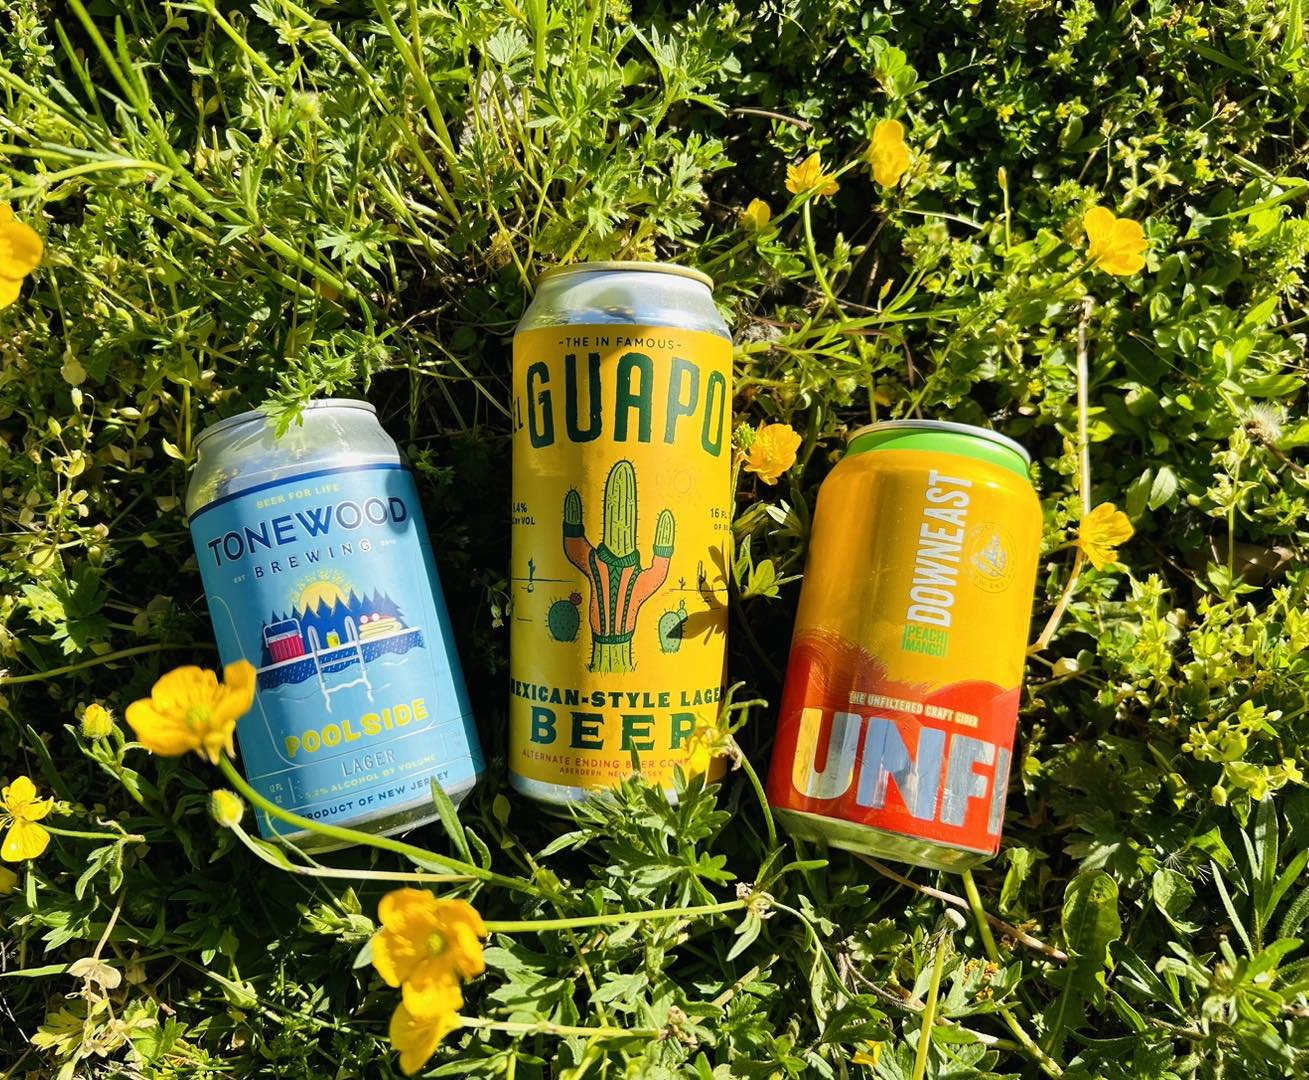 ☀️ Some Refreshing Beers &amp; Cider for this Warm Weather ☀️ 

🏝️ Tonewood Poolside Lager 😎 

🌵 Alternate Ending El Guapo Mexican-Style Lager (Cinco de Mayo!) 🌵 

Downeast Peach Mango 🍑 🥭 

#njcraftbeer #cider